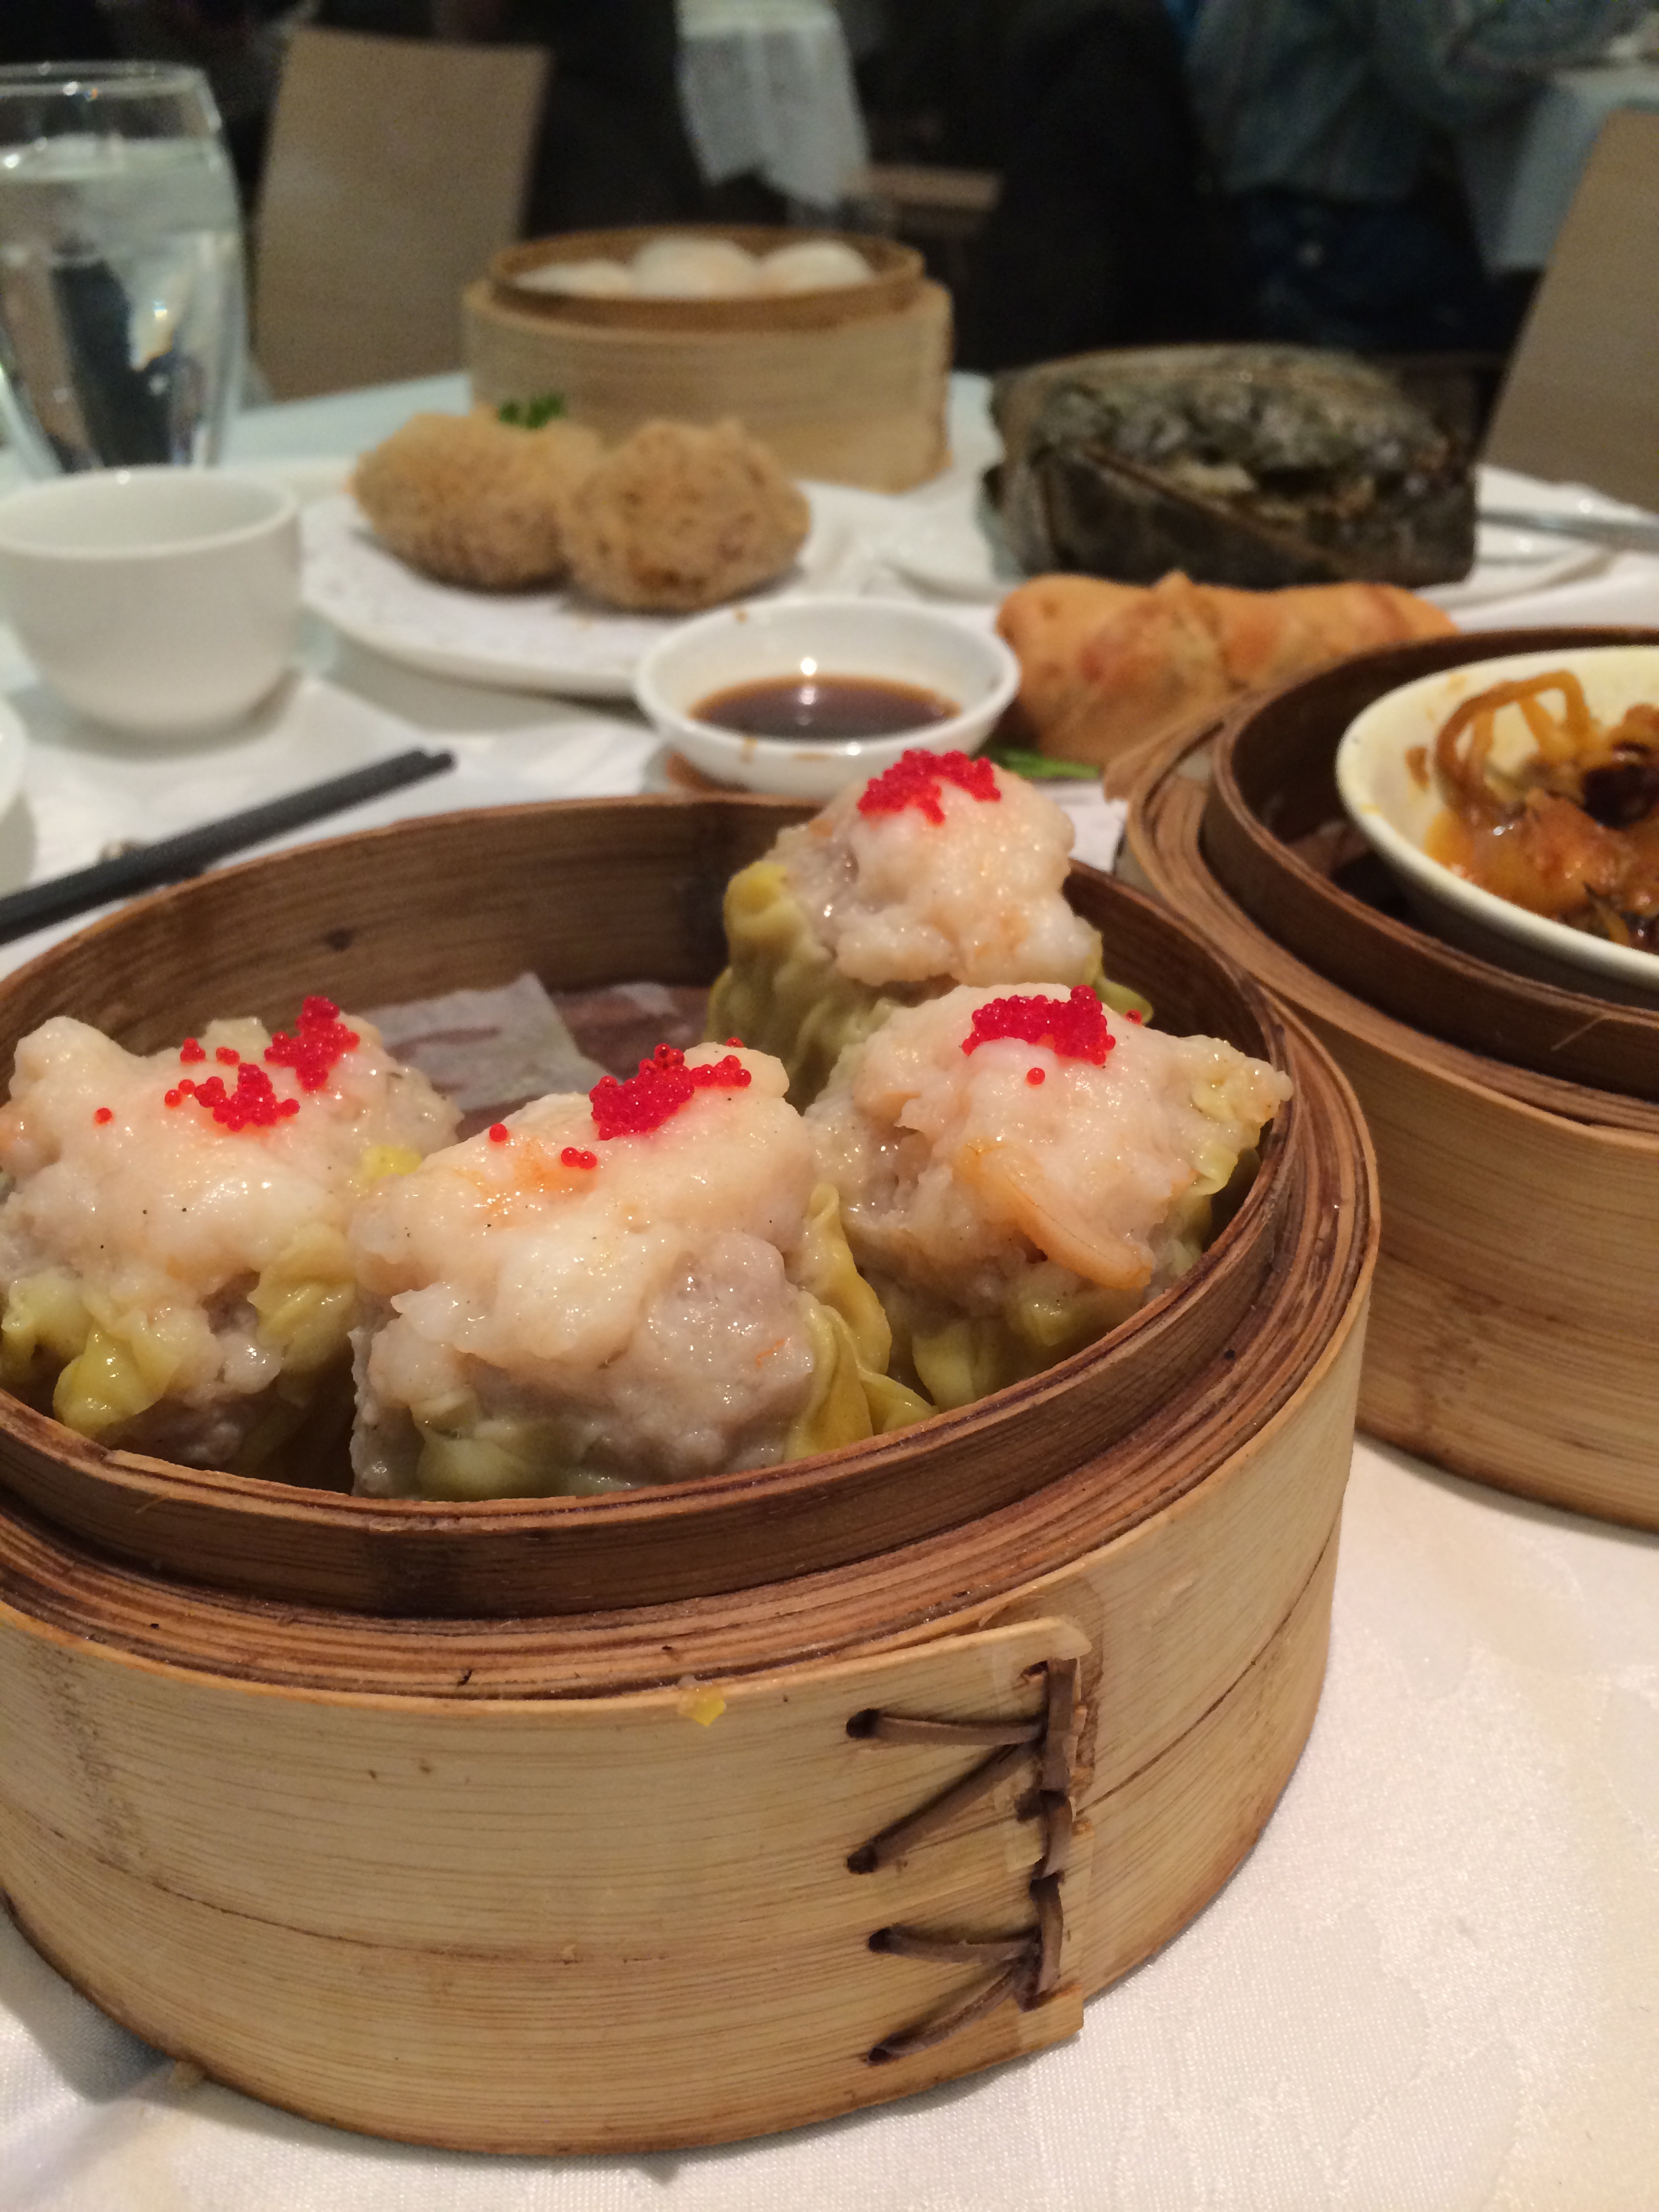 A Dim Sum How (And Where) To - UrbanMoms